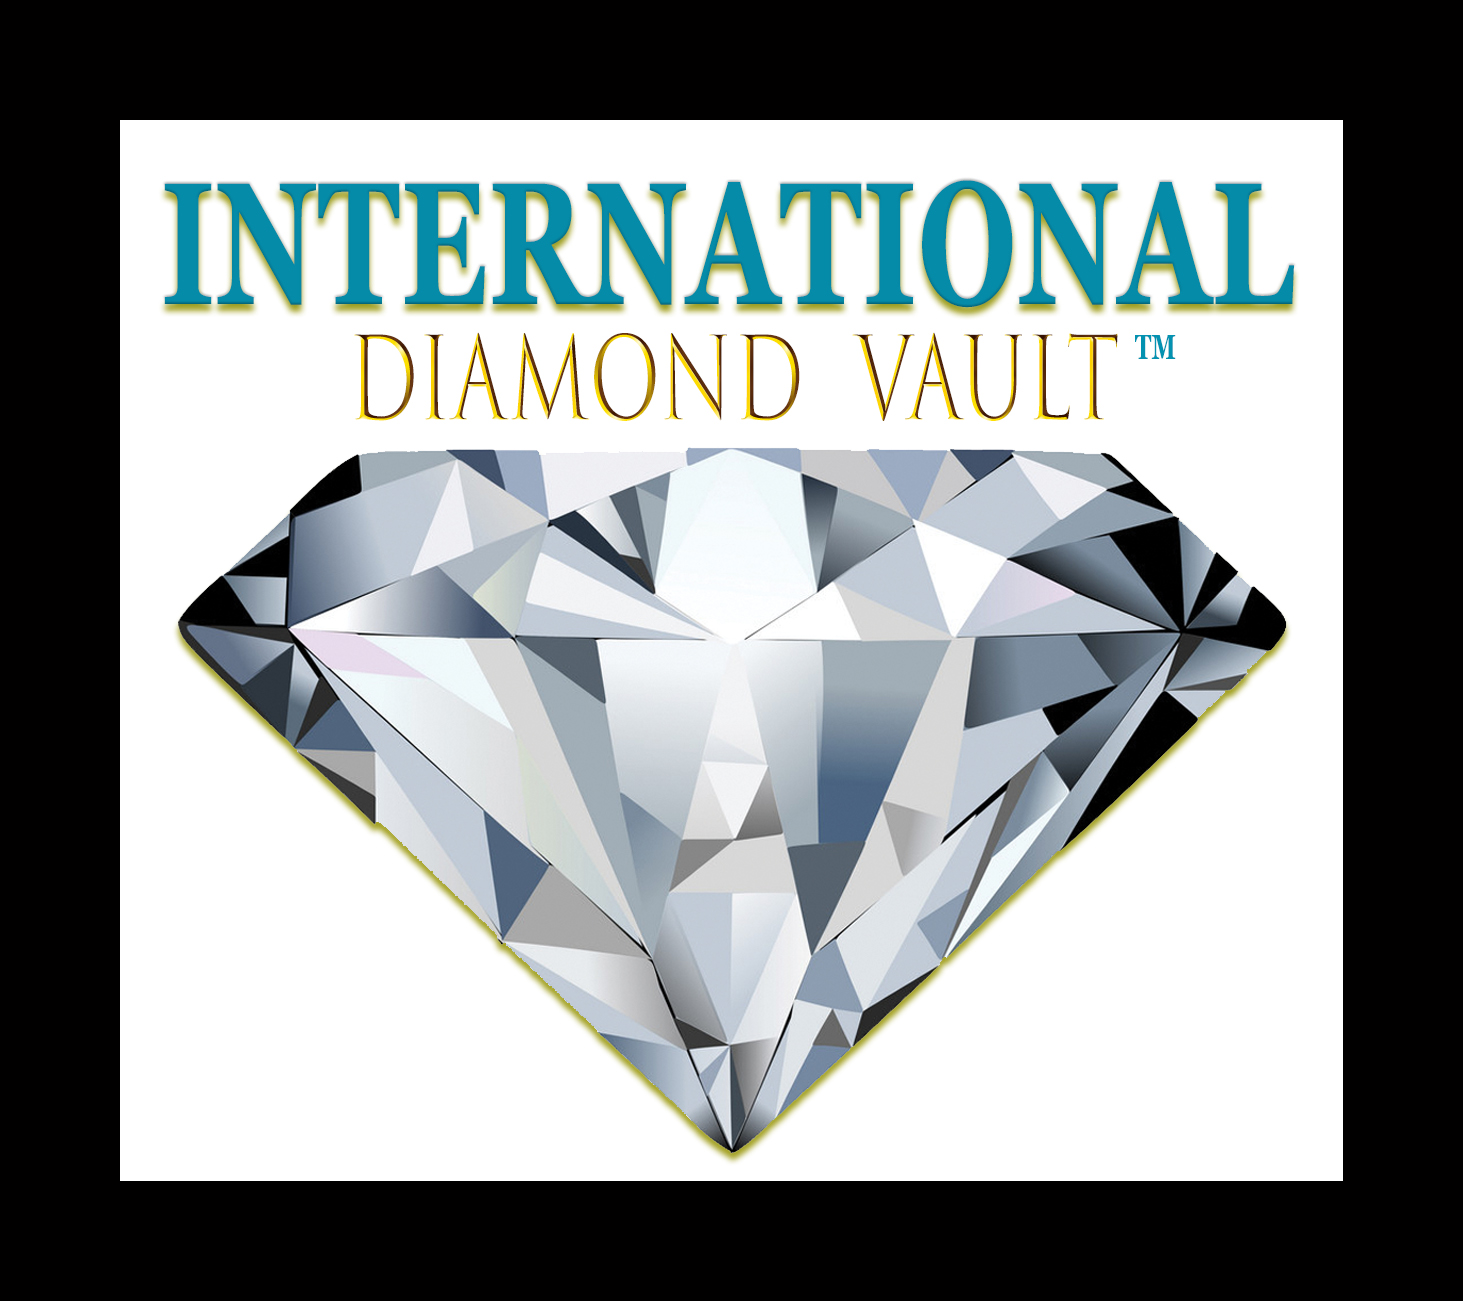 International Diamond VAULT - Protect your Assets & Earn TODAY